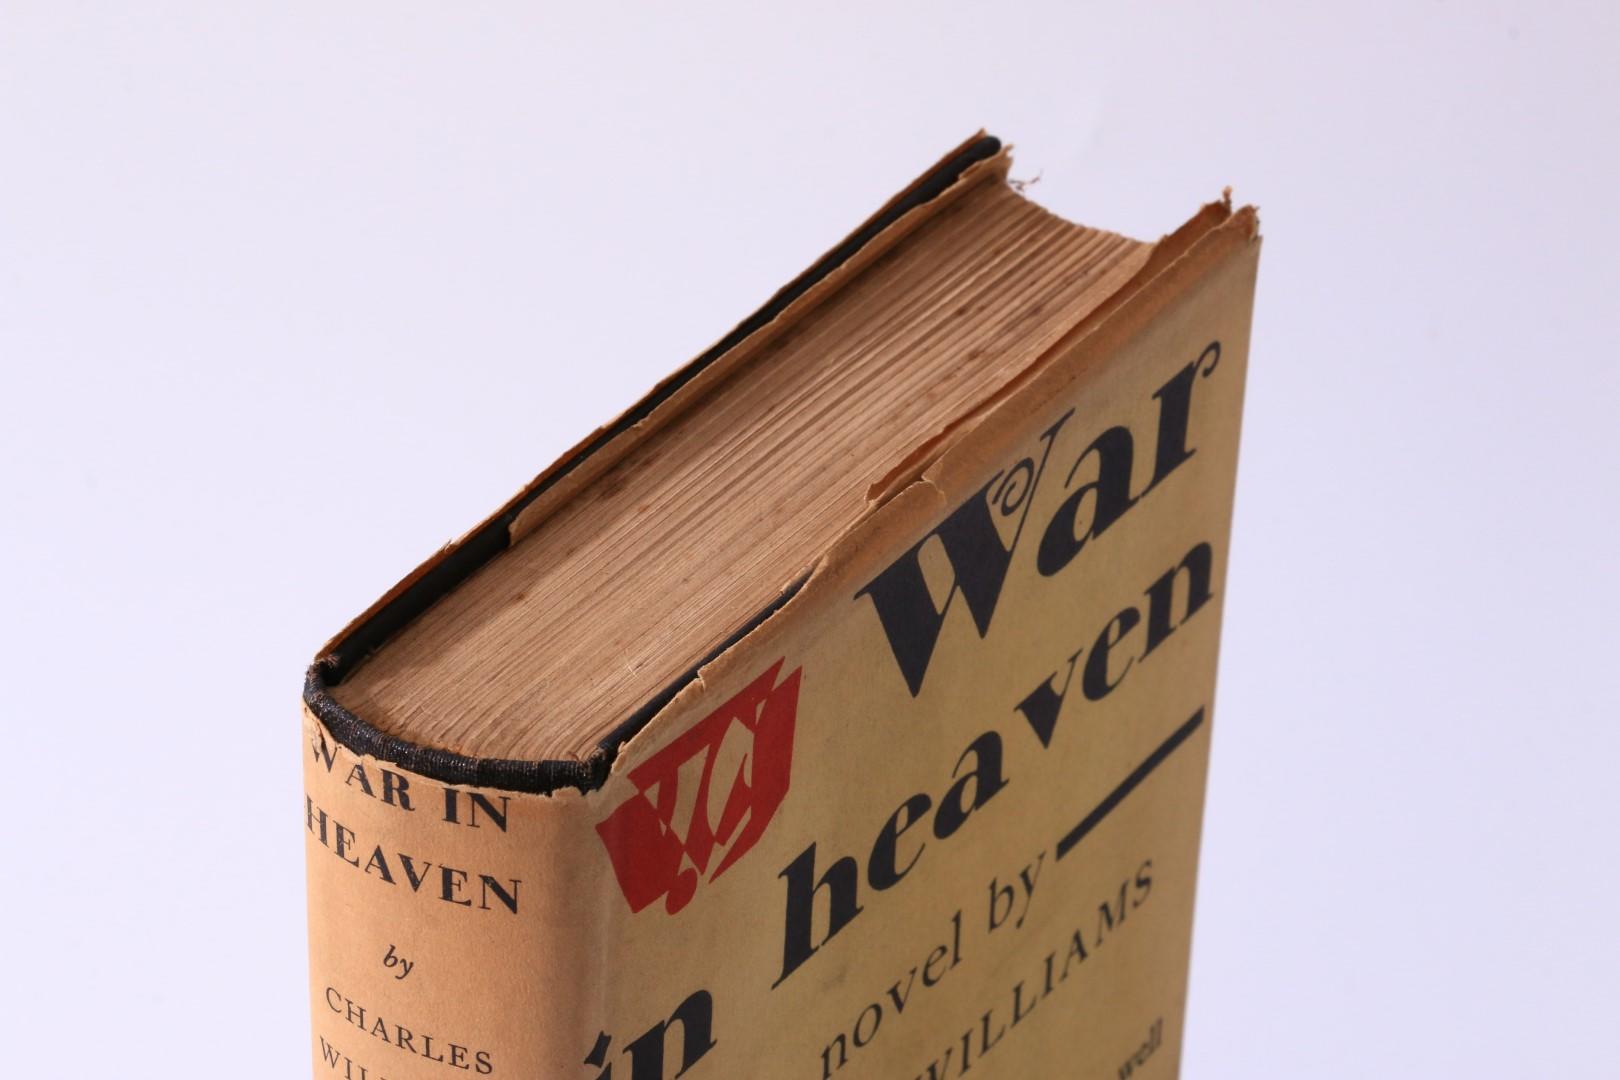 Charles Williams - War in Heaven - Gollancz, 1930, Signed First Edition.